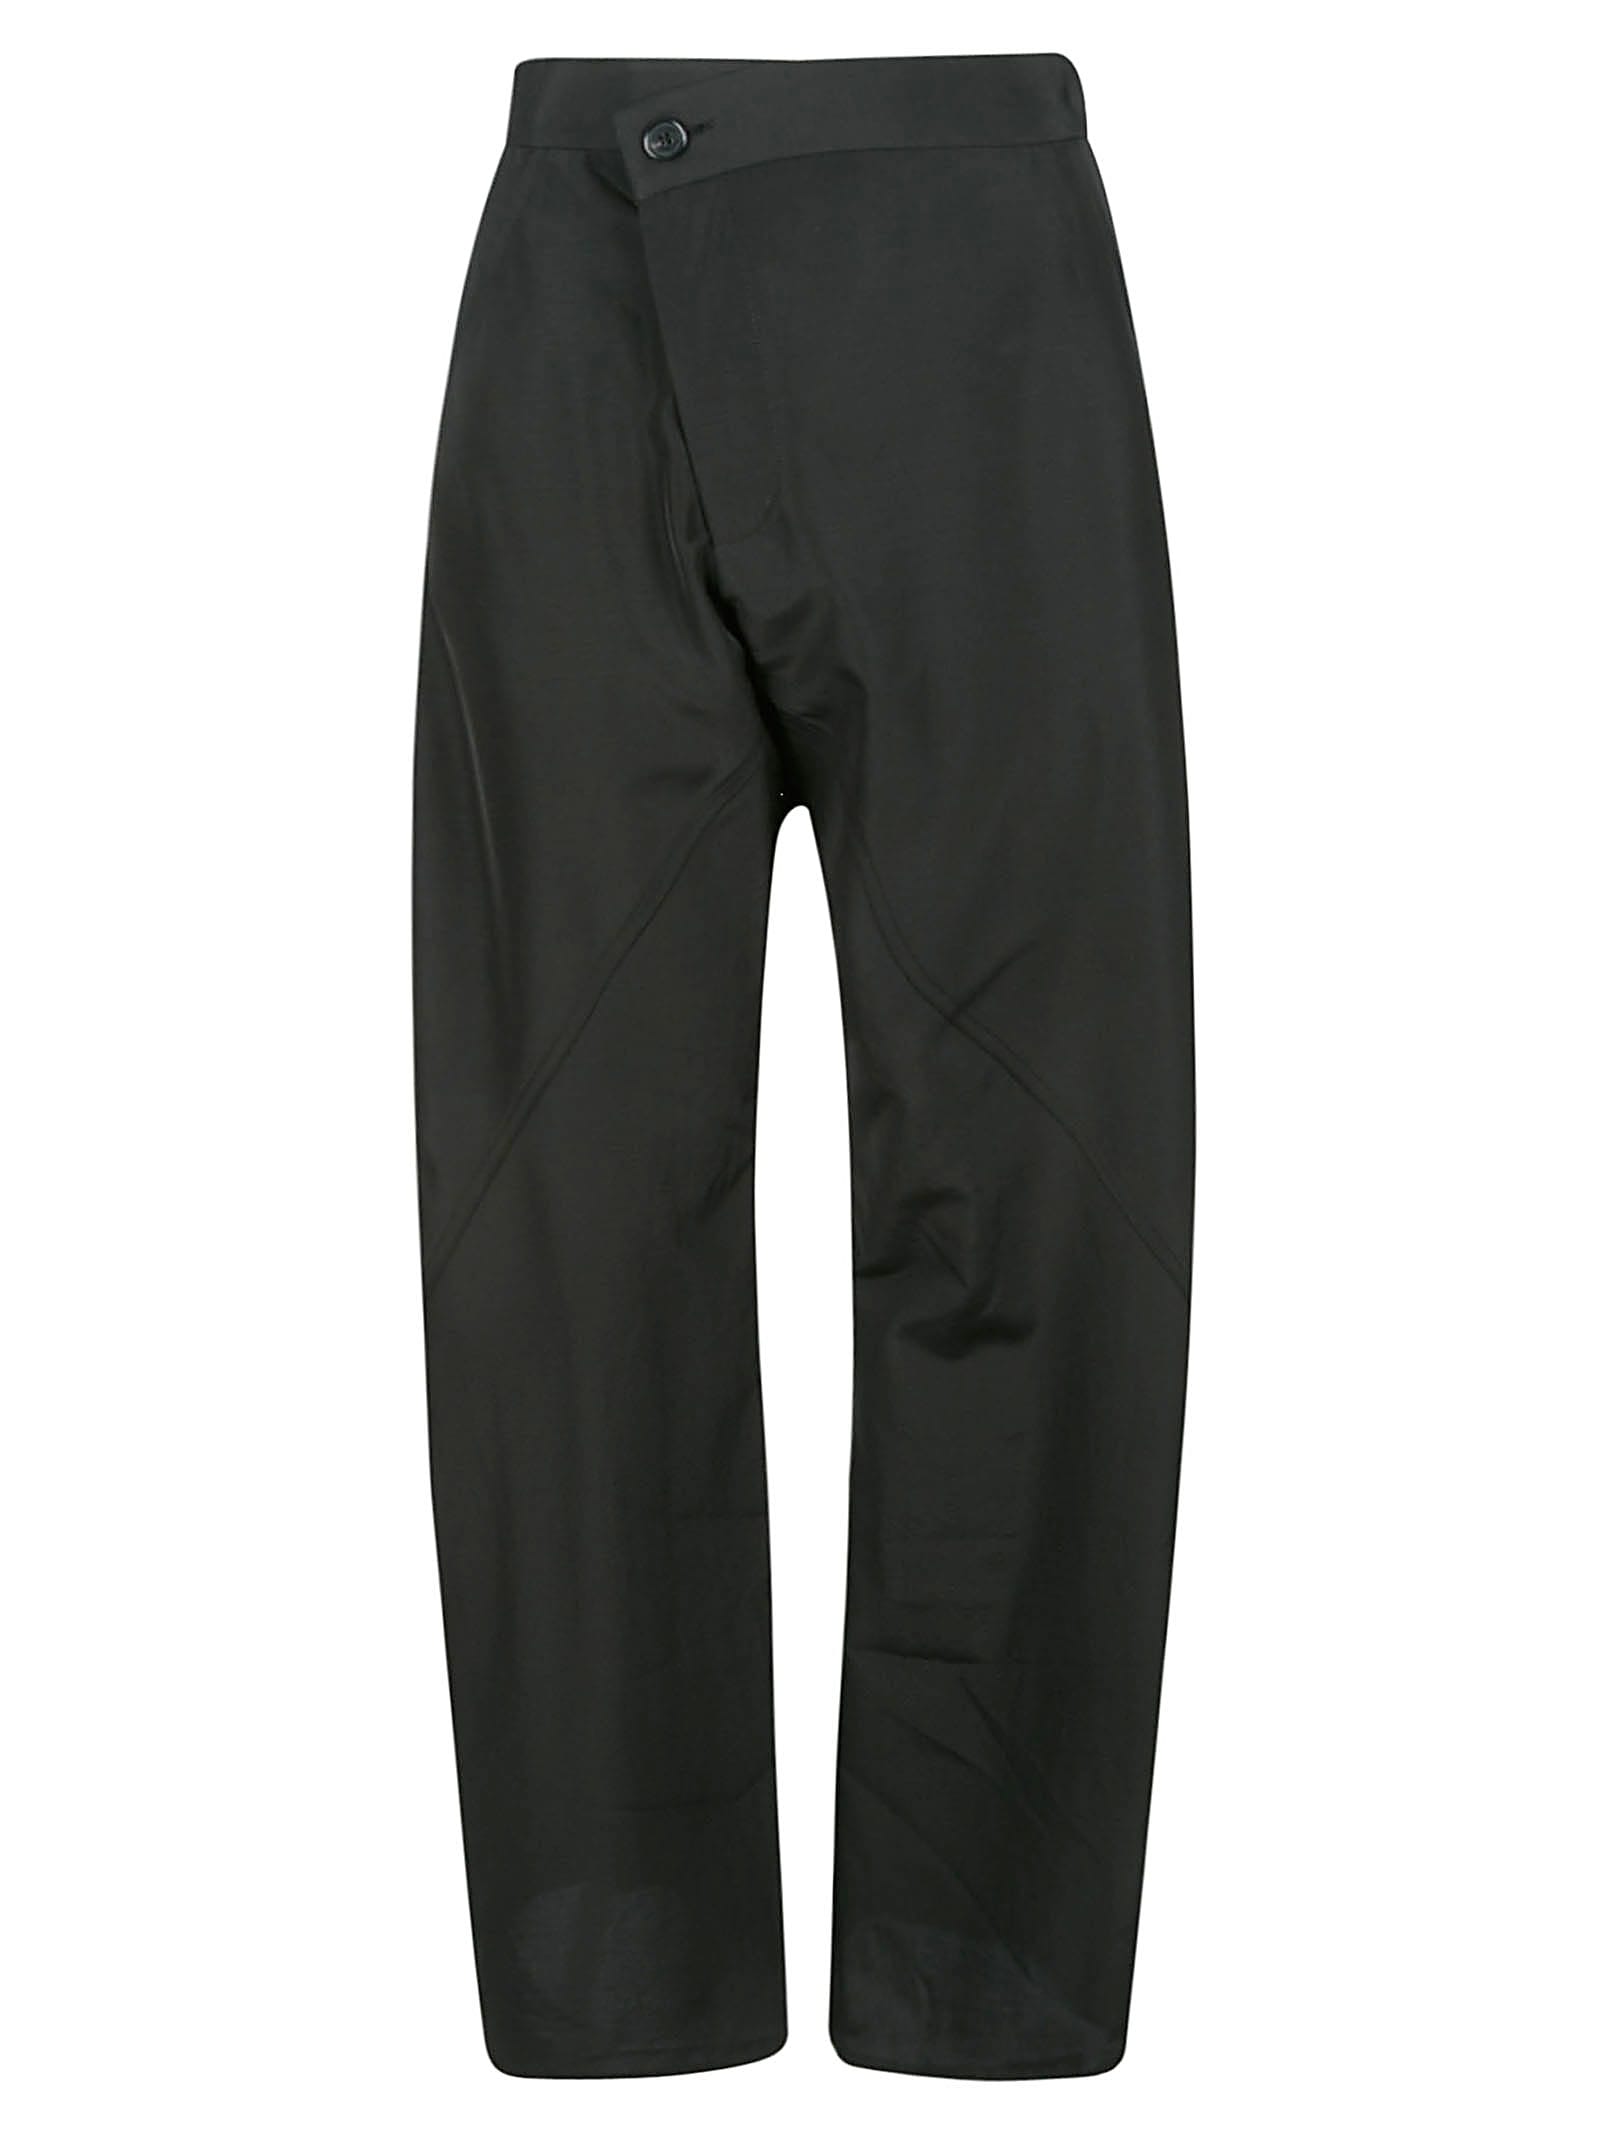 JW ANDERSON TWISTED TUXEDO TROUSERS